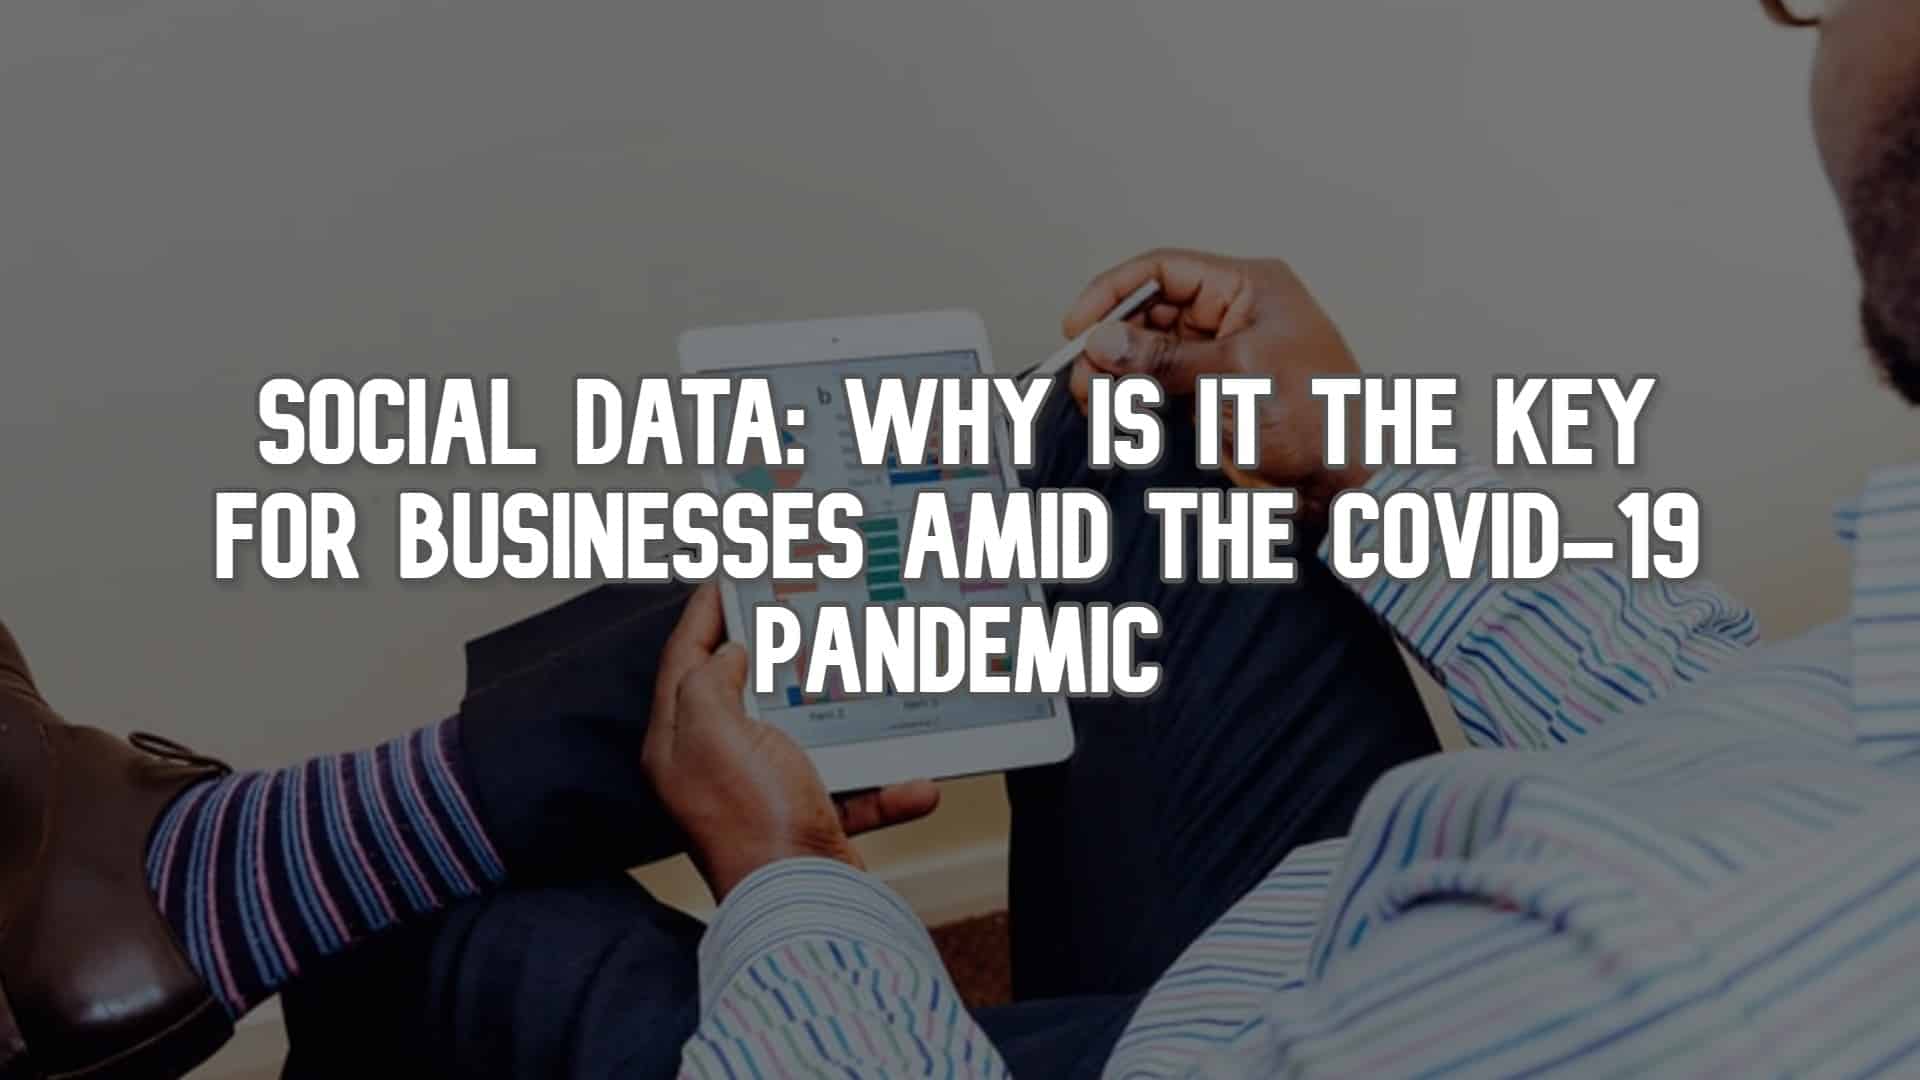 Social Data: Why is it the Key for Businesses Amid the COVID-19 Pandemic